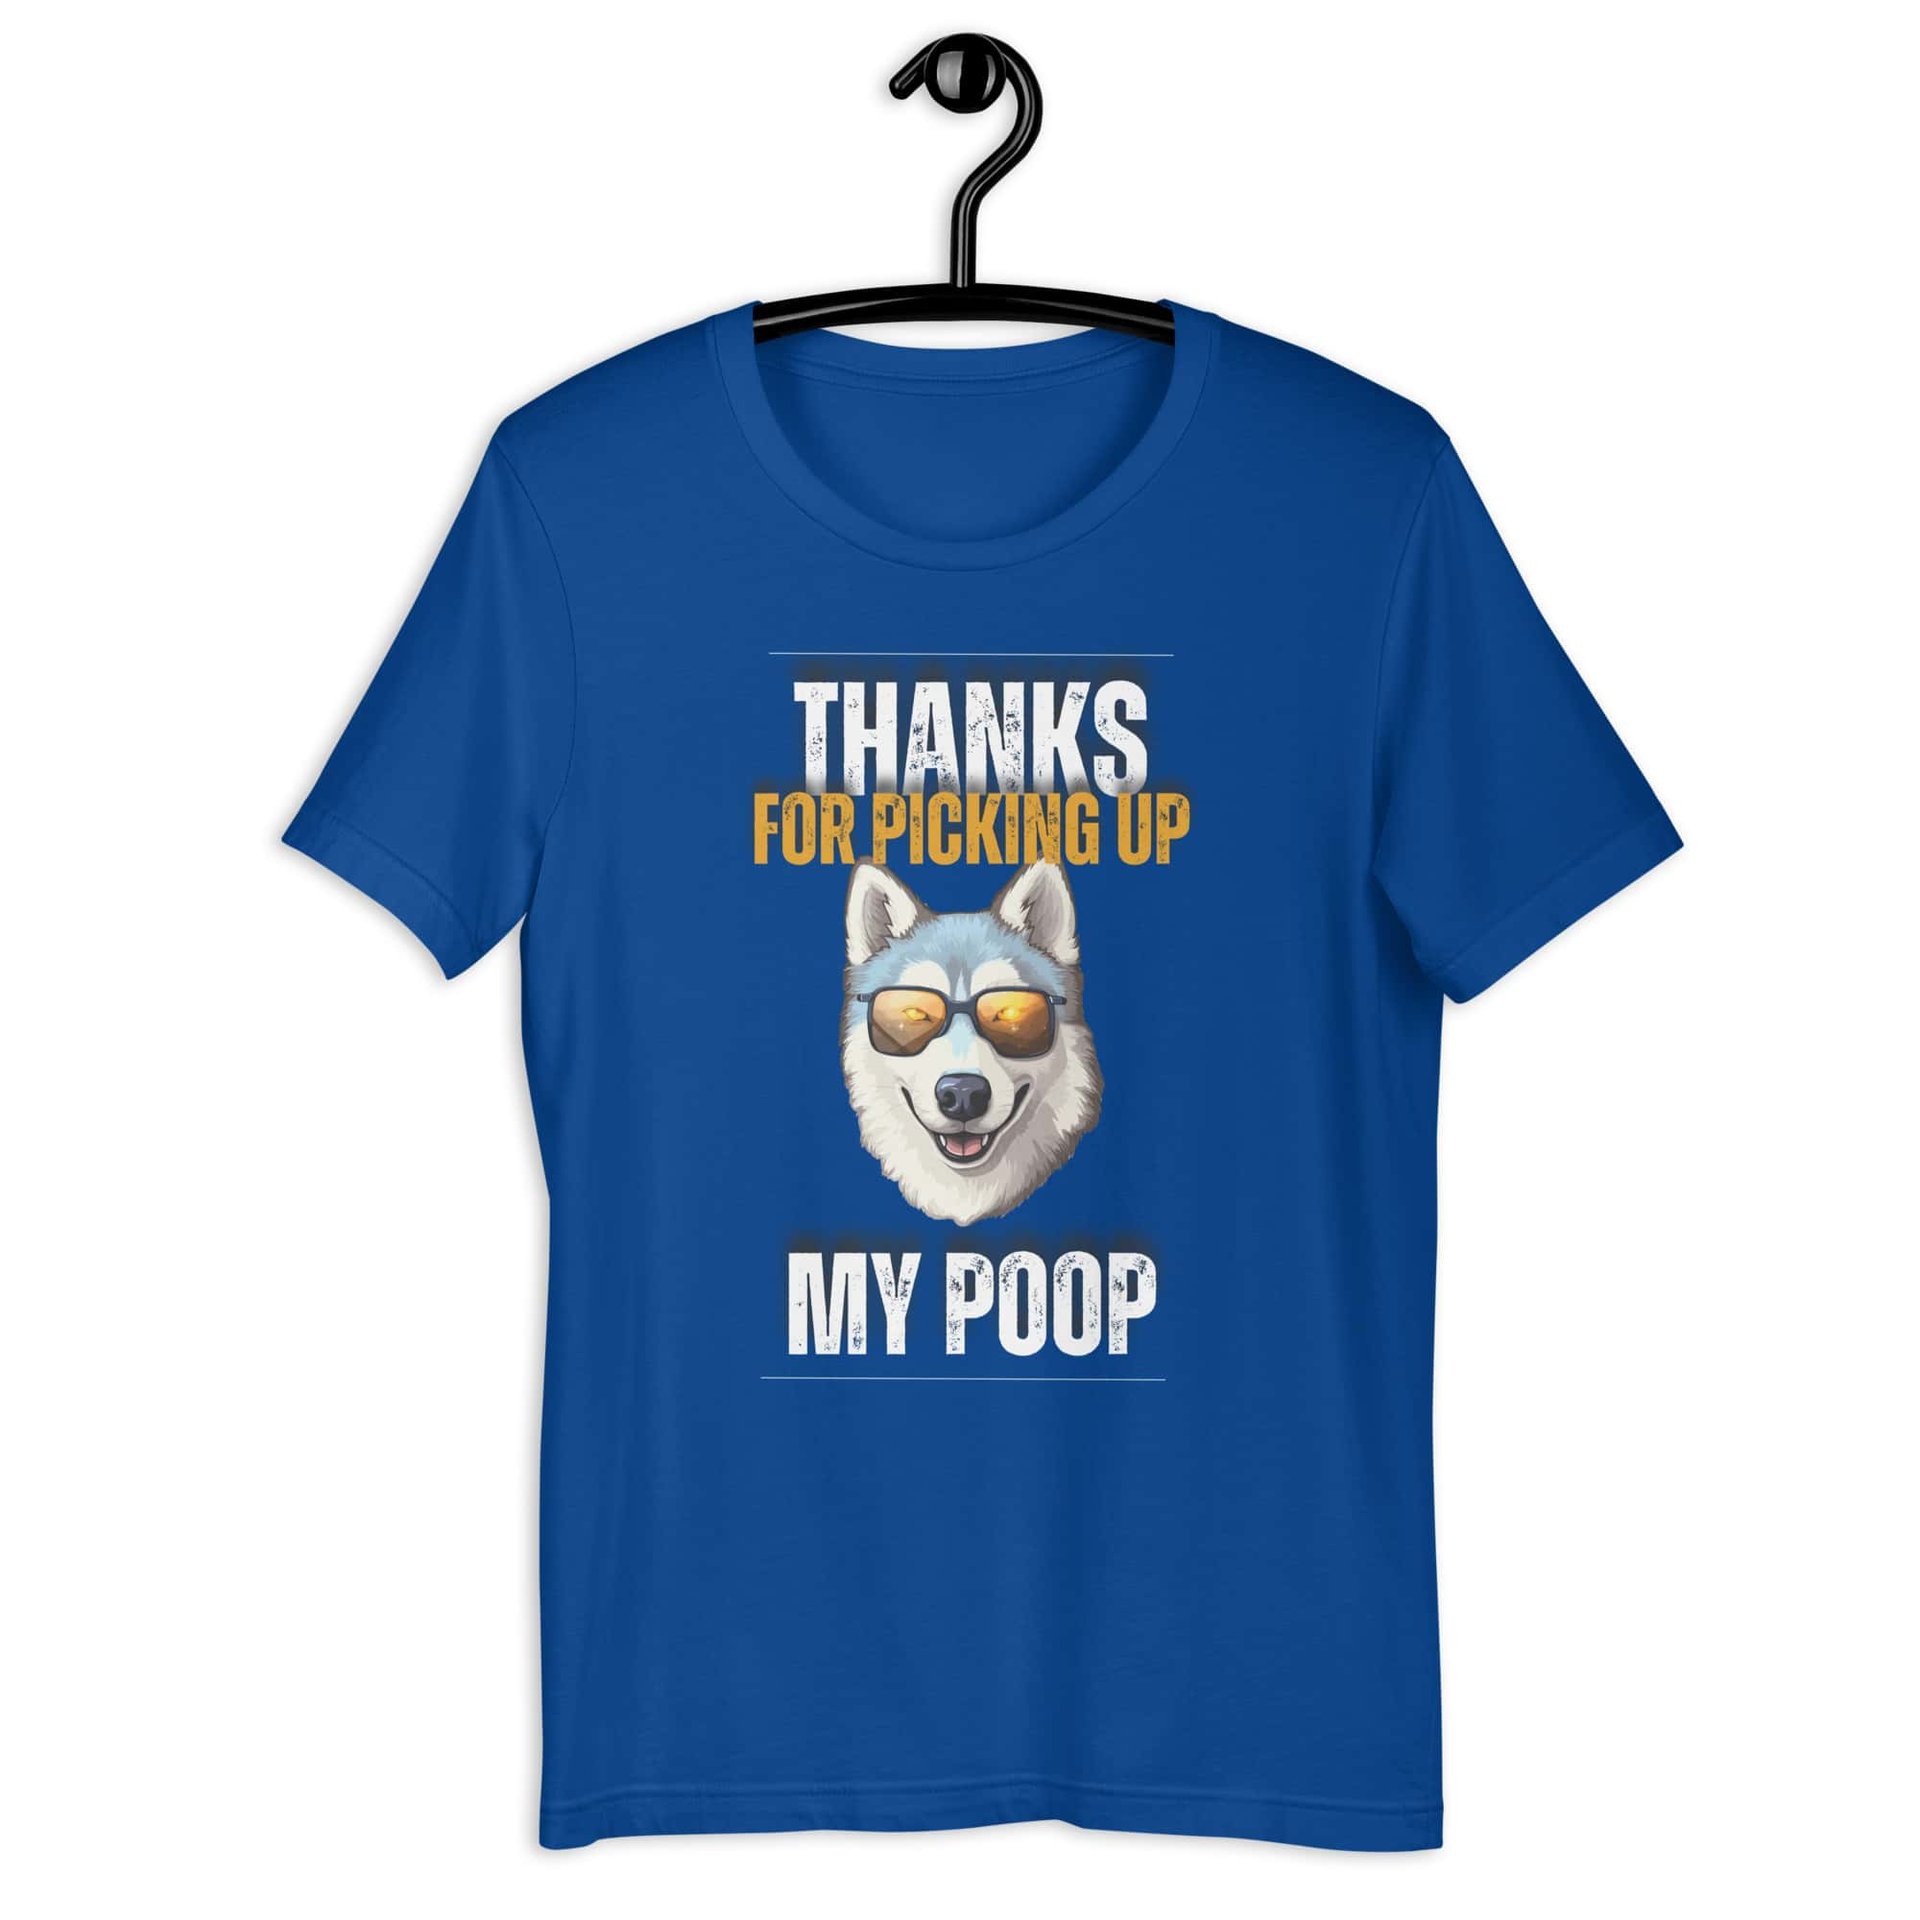 Thanks For Picking Up My POOP Funny Huskies Unisex T-Shirt. Royal Blue